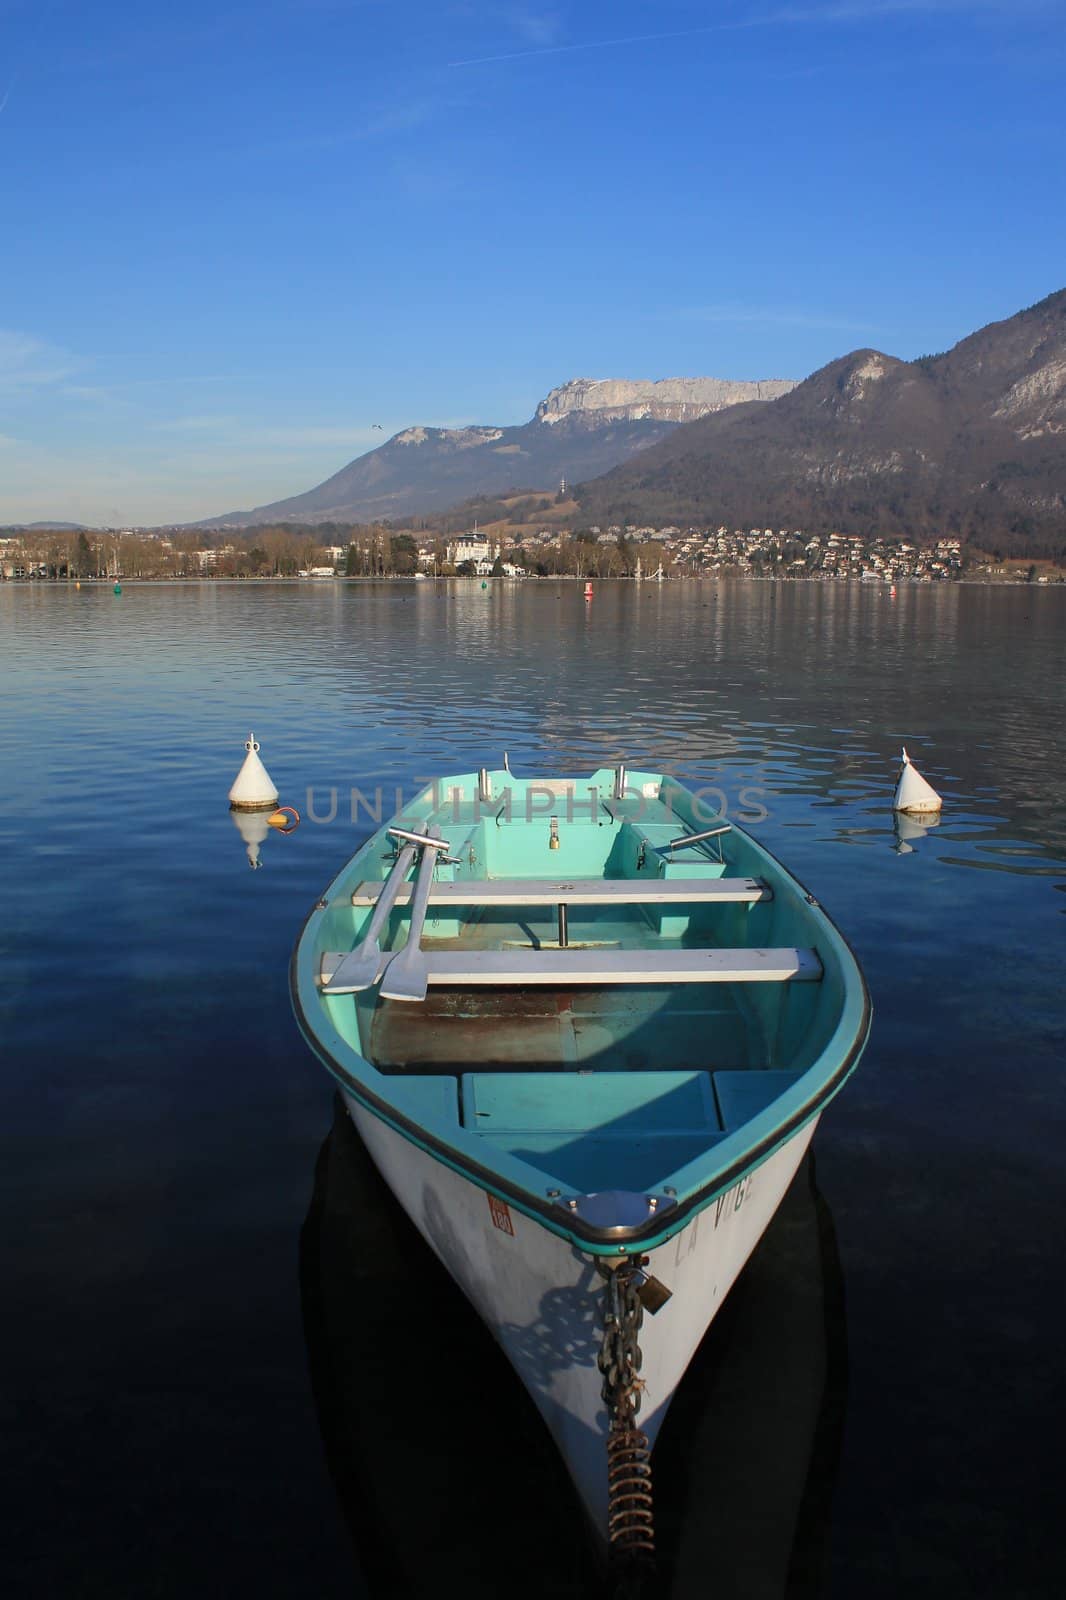 Wood boat on the Annecy lake, France by Elenaphotos21